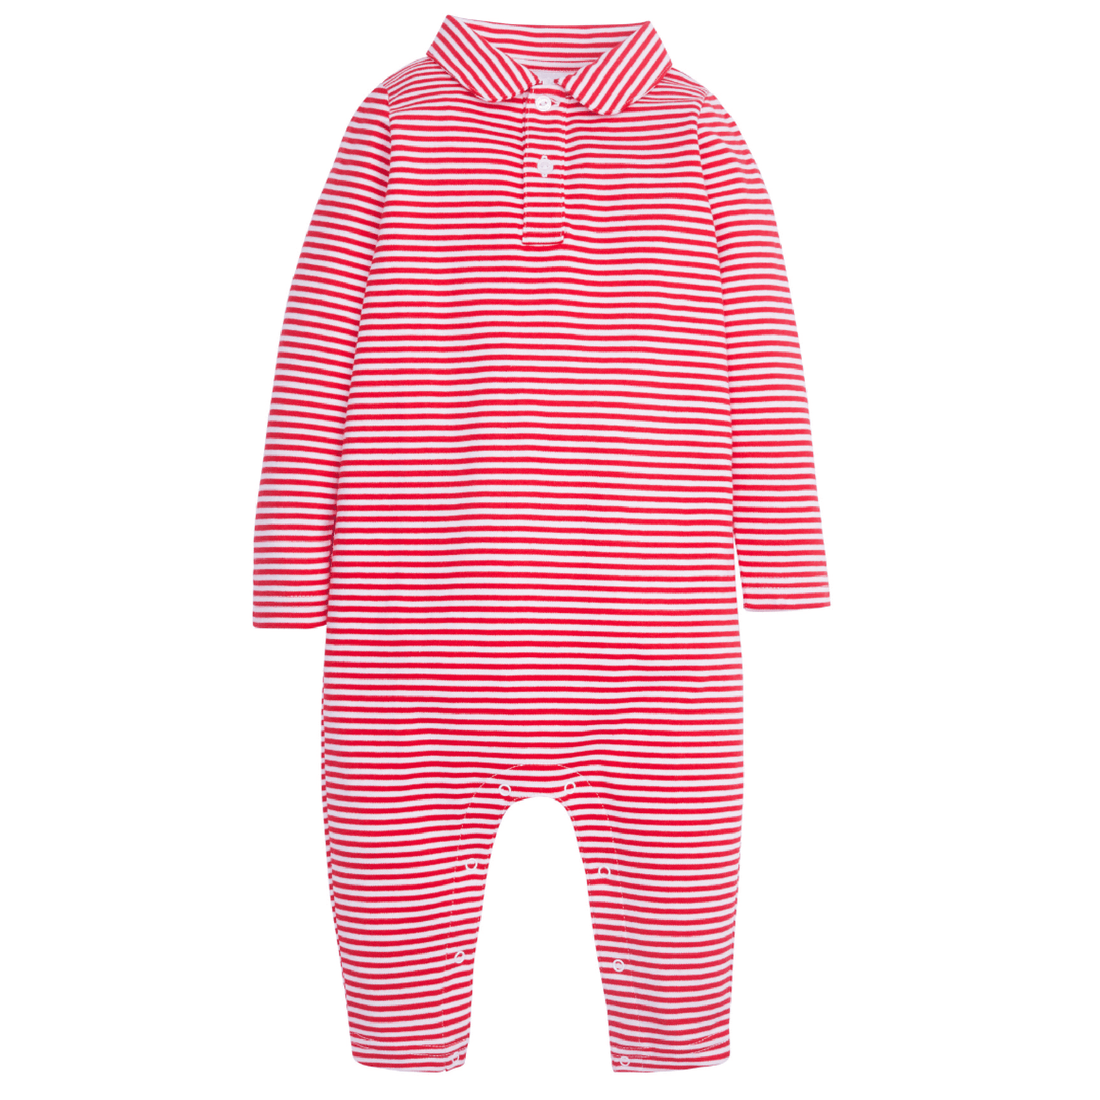 little english classic childrens clothing boys red and white striped long sleeve polo romper